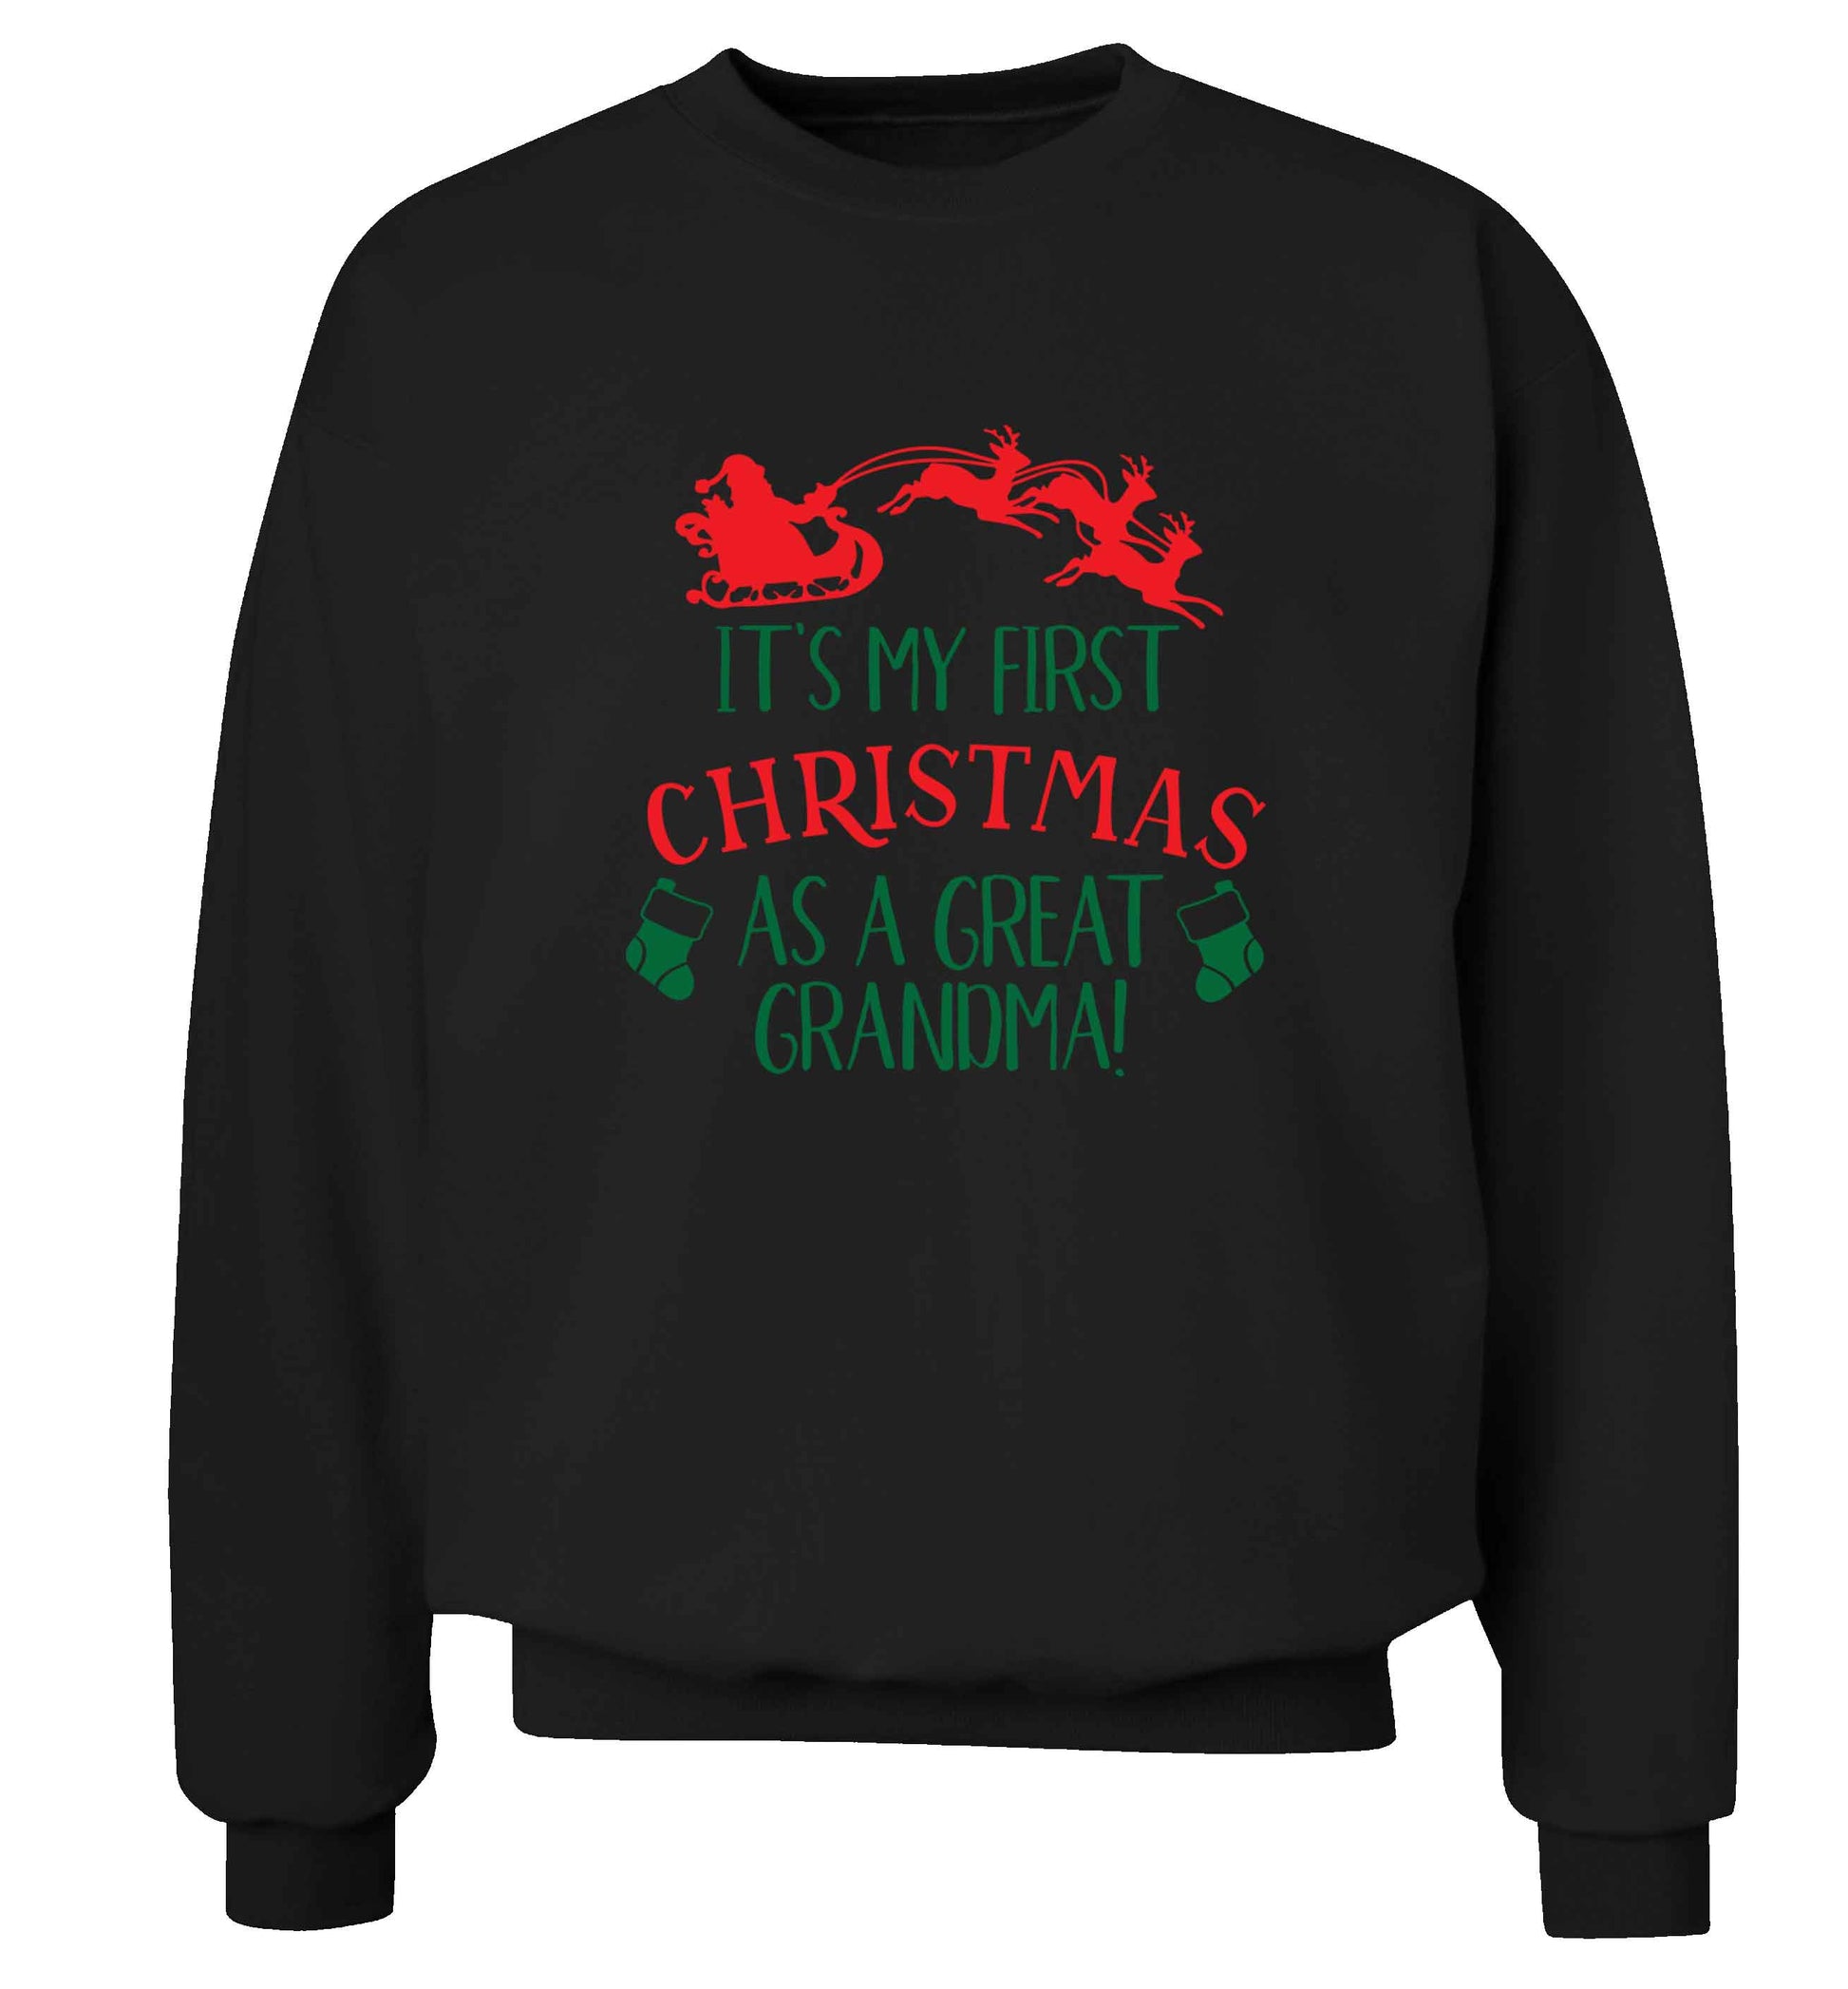 It's my first Christmas as a great grandma! Adult's unisex black Sweater 2XL